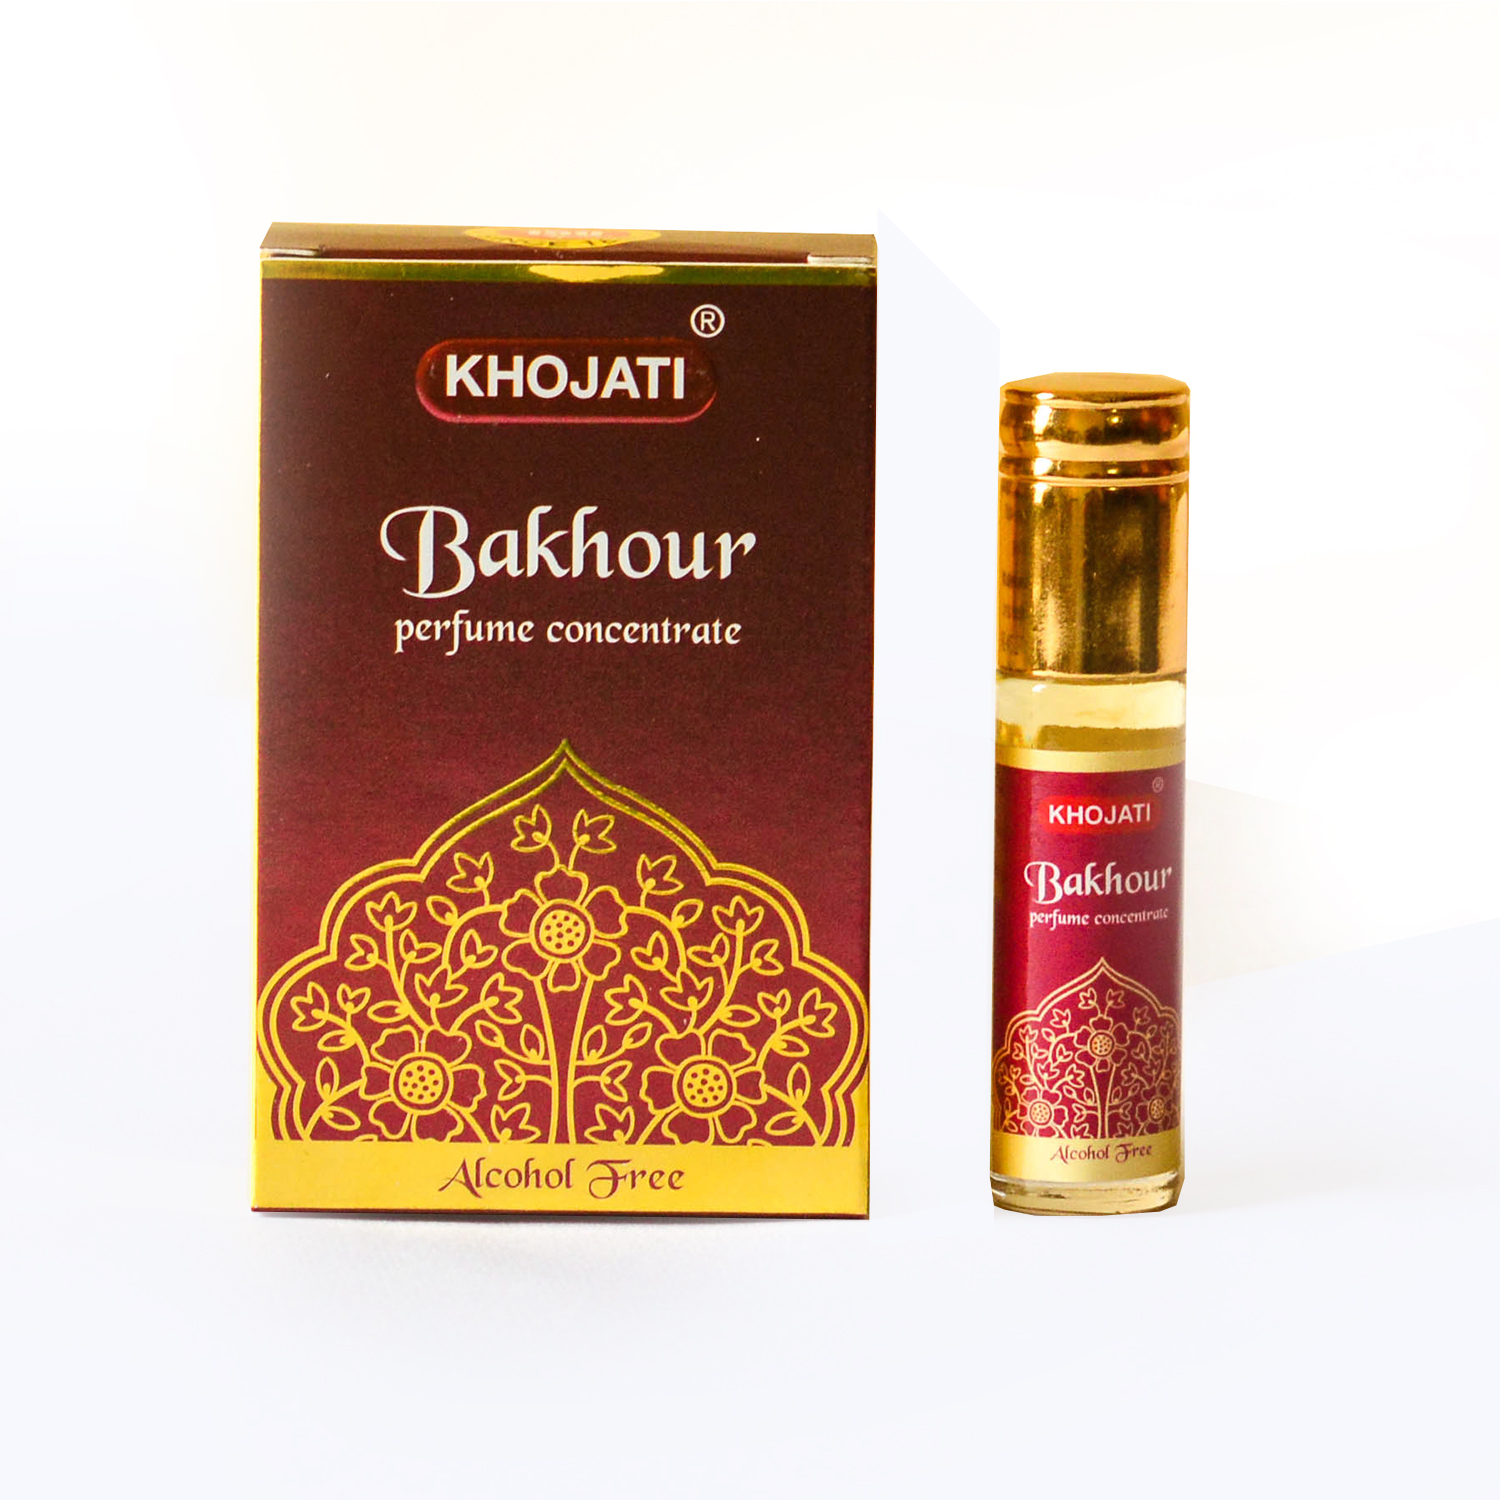 PERFUME CONCENTRATE BAKHOUR – Khojati